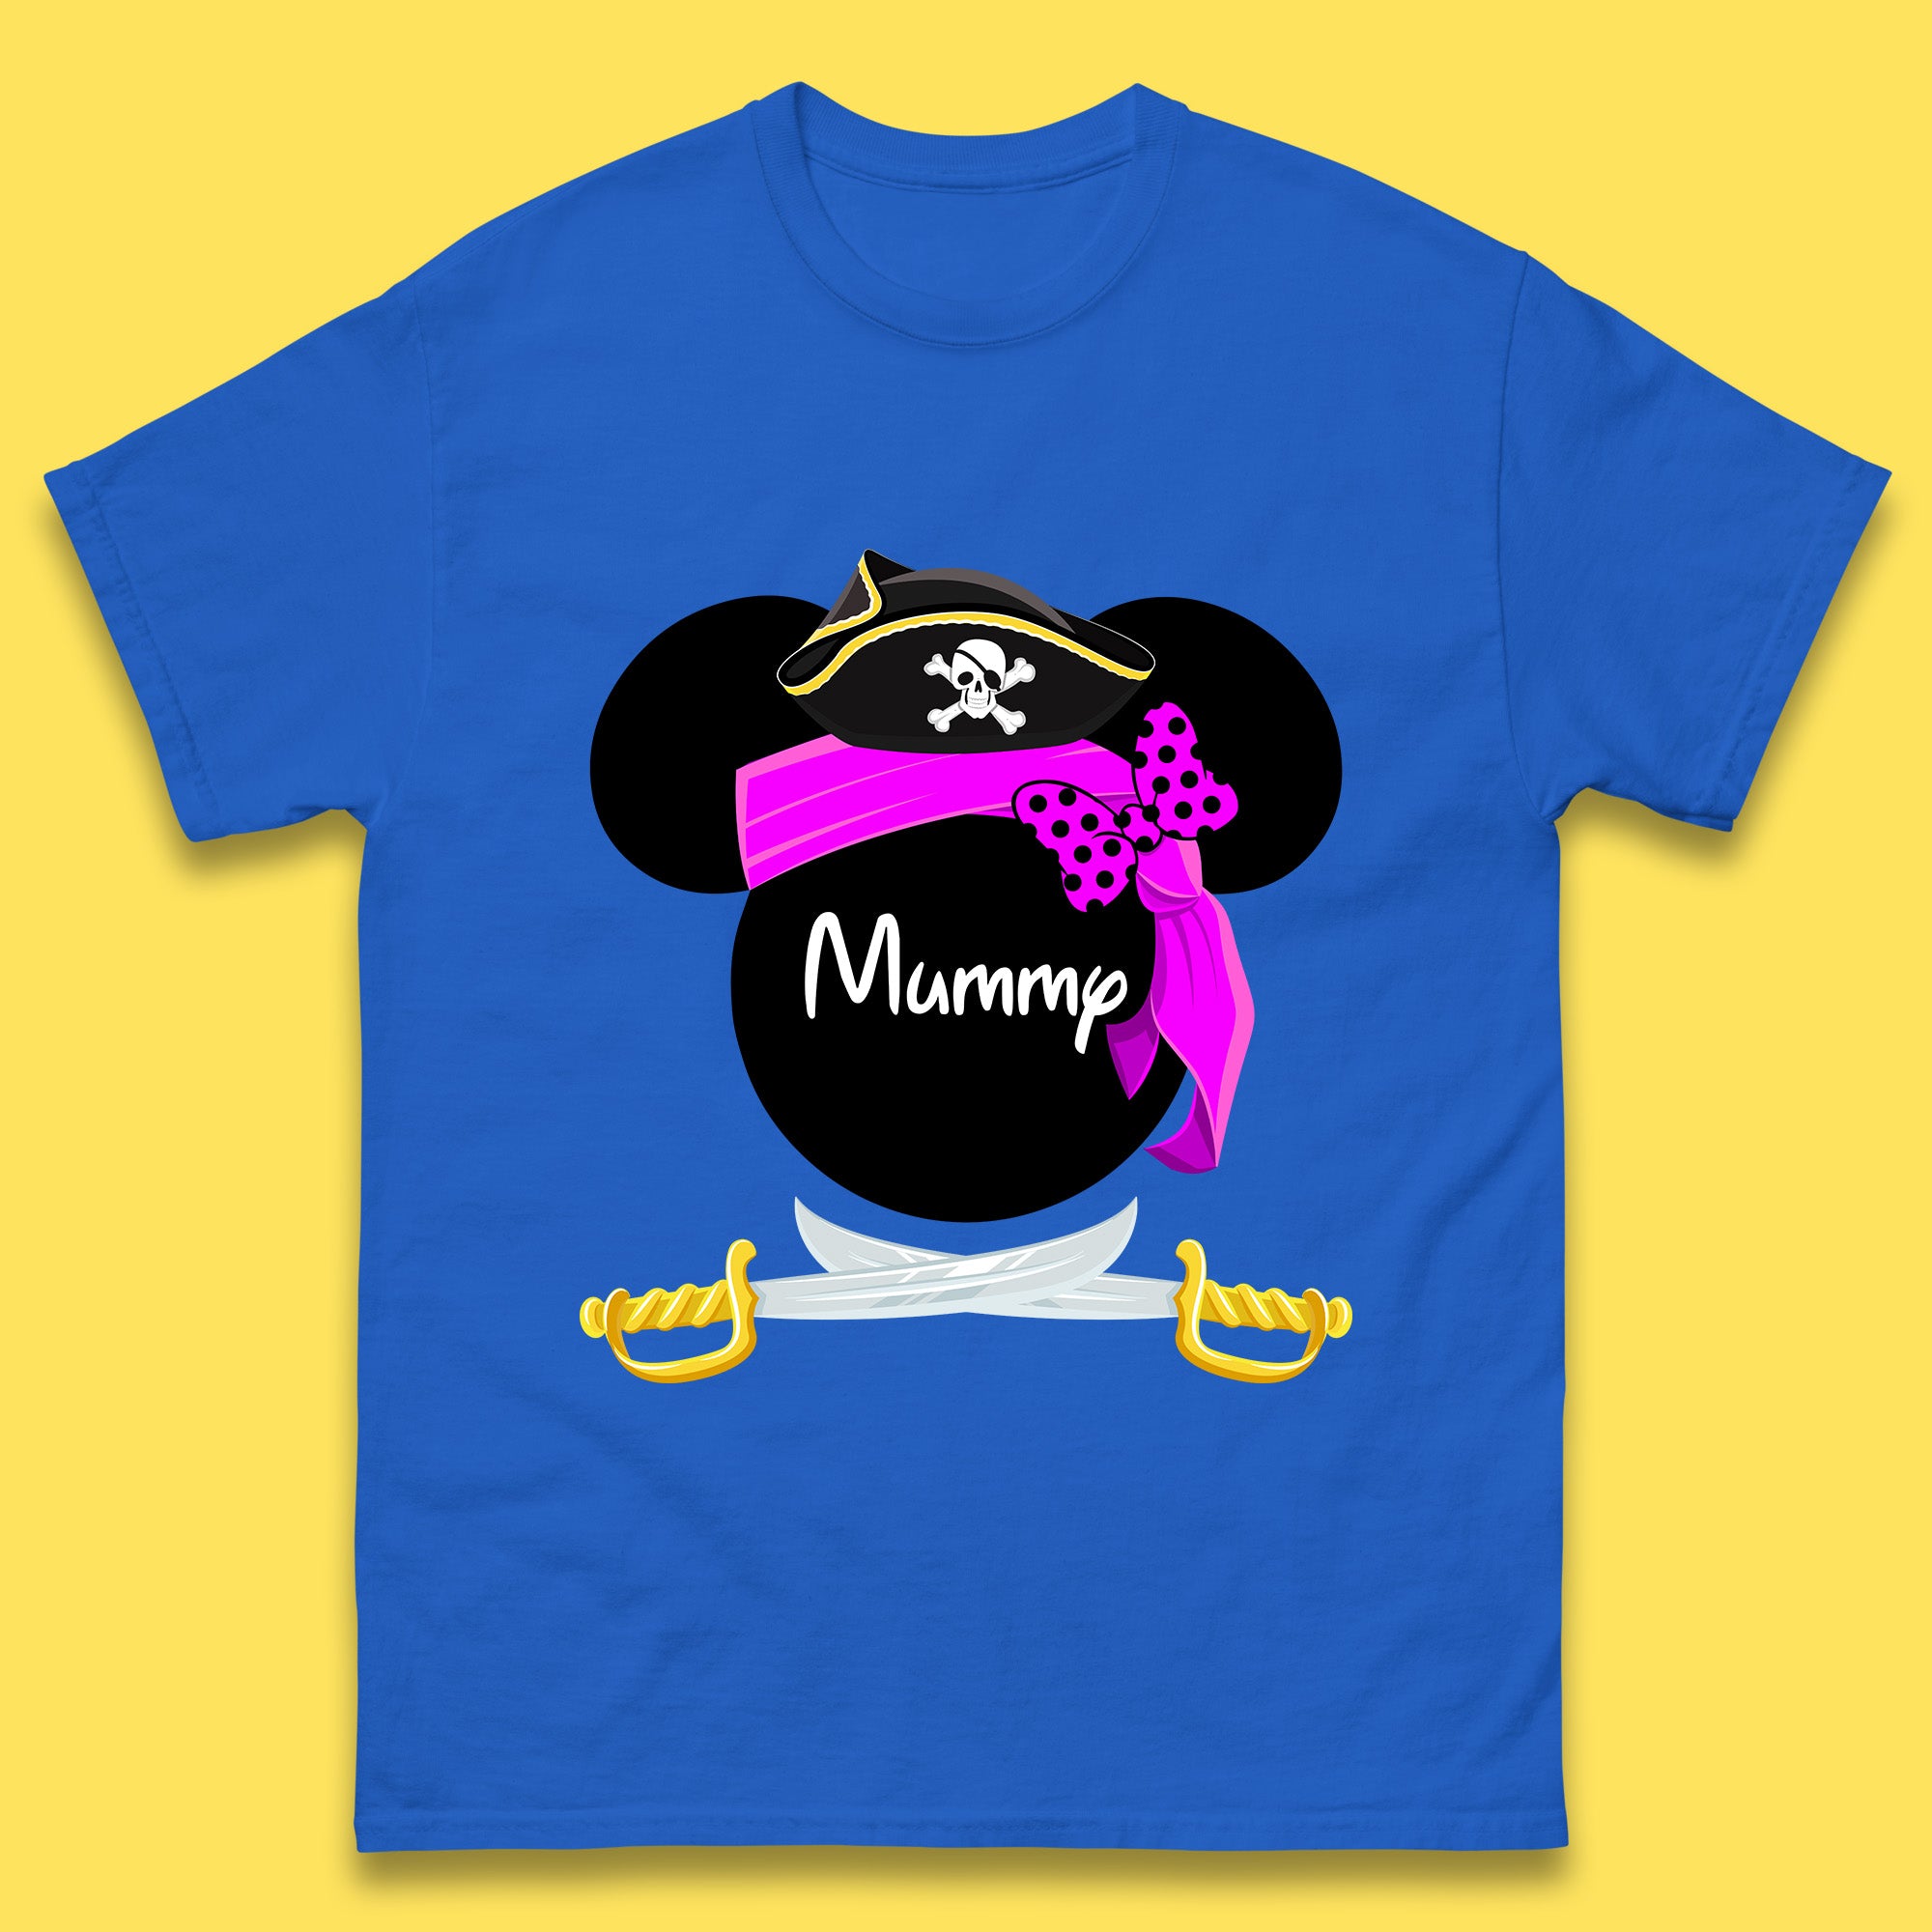 Disney Pirate Mickey Mouse Pirate Minnie Mouse Head Disney World Pirate Swords Cruise Trip Magical Kingdom Mens Tee Top